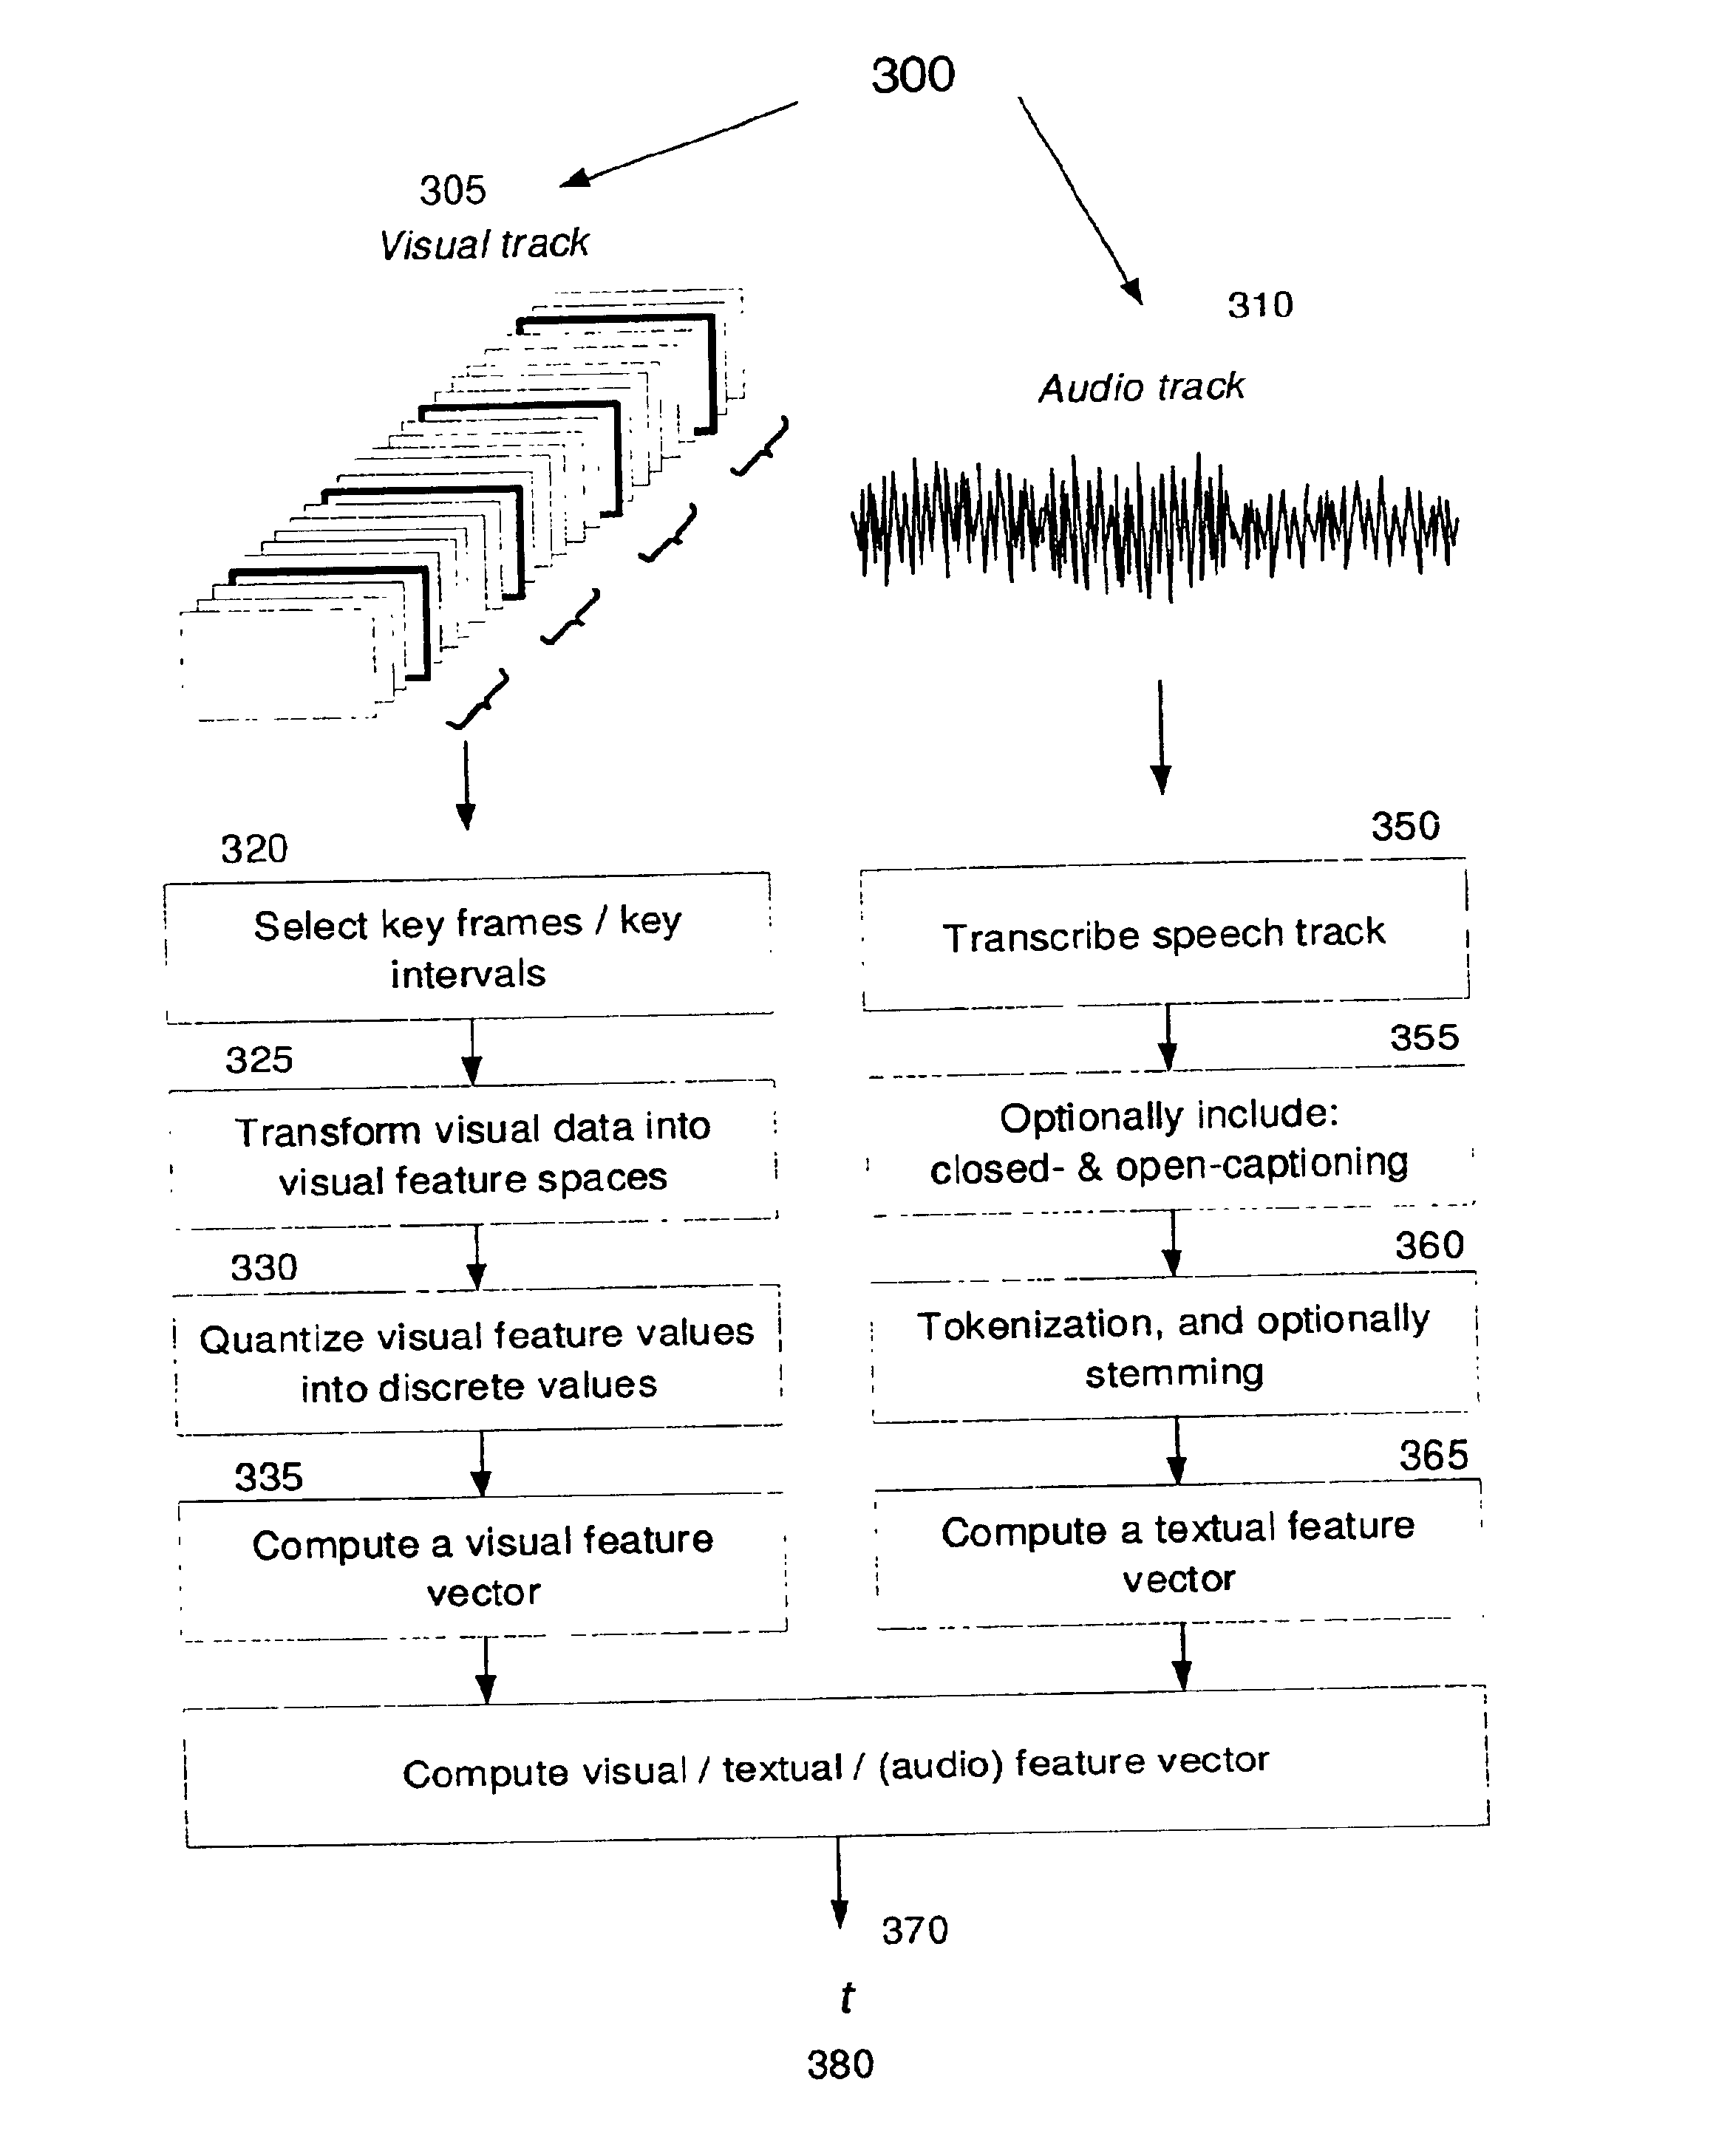 Method and apparatus for inducing classifiers for multimedia based on unified representation of features reflecting disparate modalities